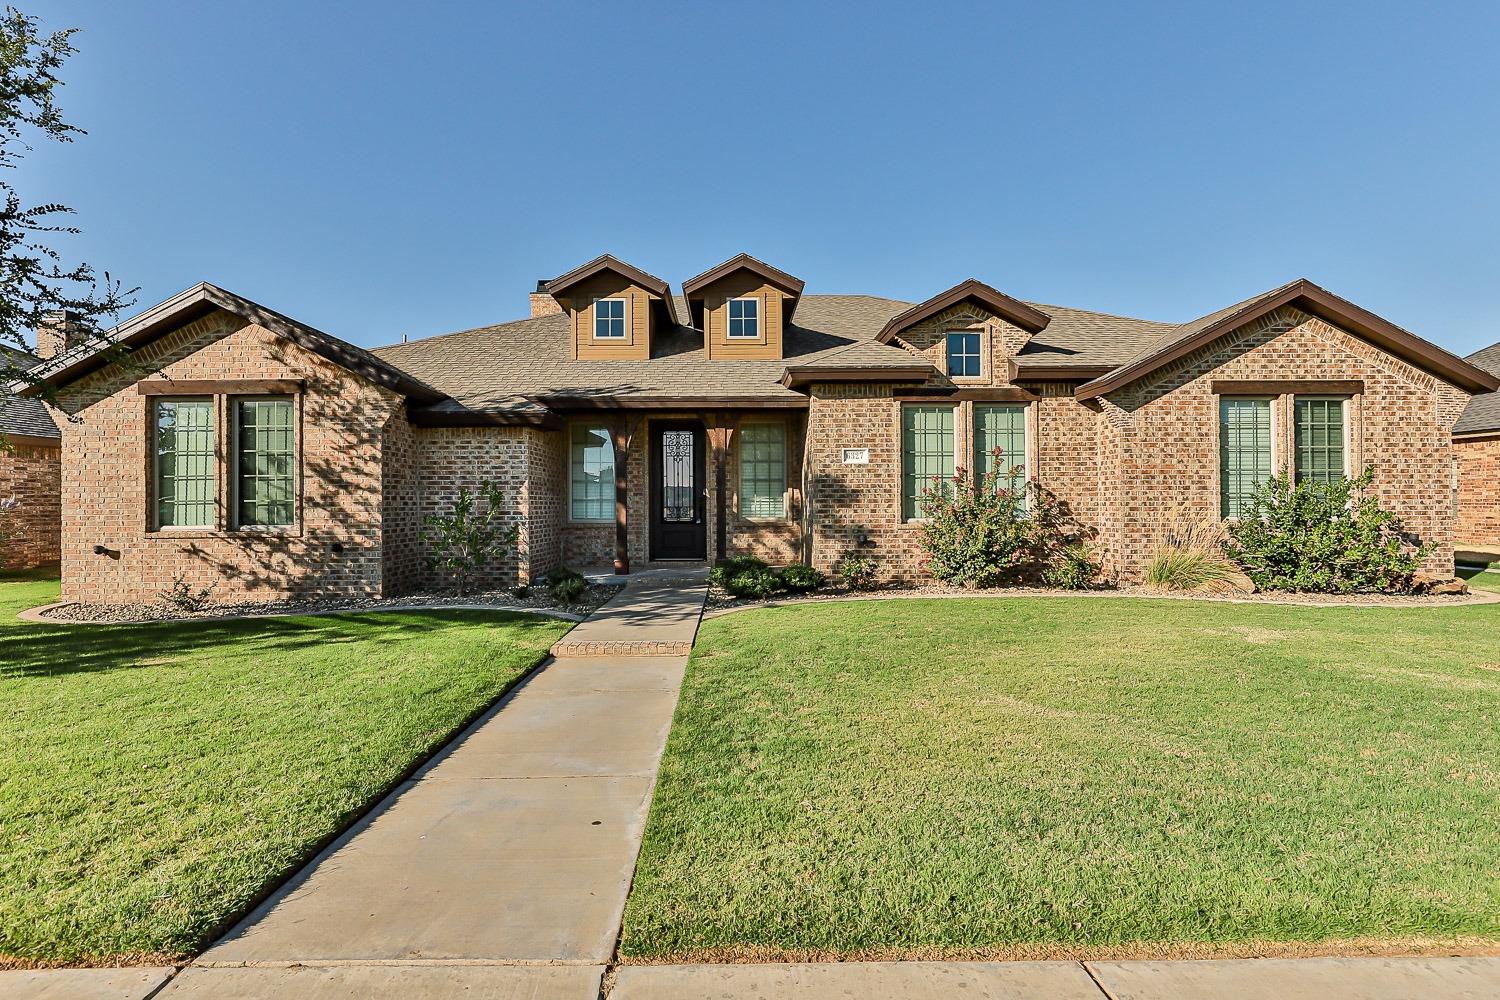 Stunning Find in Bacon Crest!  This fabulous 4/3/2 home is nestled in the 2012 Parade of Homes Cul-de-sac.  The impressive landscaping, cedar accents paired with unique lighting compliment the brick exterior & provide great curb appeal.  Upon entering you are greeted w/gorgeous hardwood floors, vaulted ceiling, wood beam accents & fantastic open floor plan.  Chef's kitchen boasts granite counters, gas cooktop, breakfast bar, stainless steel appliances, spacious island, breakfast nook & tons of storage. The formal dining is perfect for larger gatherings or can double as an additional living area or study. You can host family and friends with ease in the large living area which is adorned w/windows & corner fireplace. All bedrooms have new carpet.  The isolated primary speaks of luxury with an ornate vaulted ceiling & gorgeous ensuite w/granite counters, airflow tub & huge walk in closet. Bedrooms 2/3 are adjoined by Jack & Jill bath. 4th bedroom is isolated w/a bathroom. (7'cedar fence)